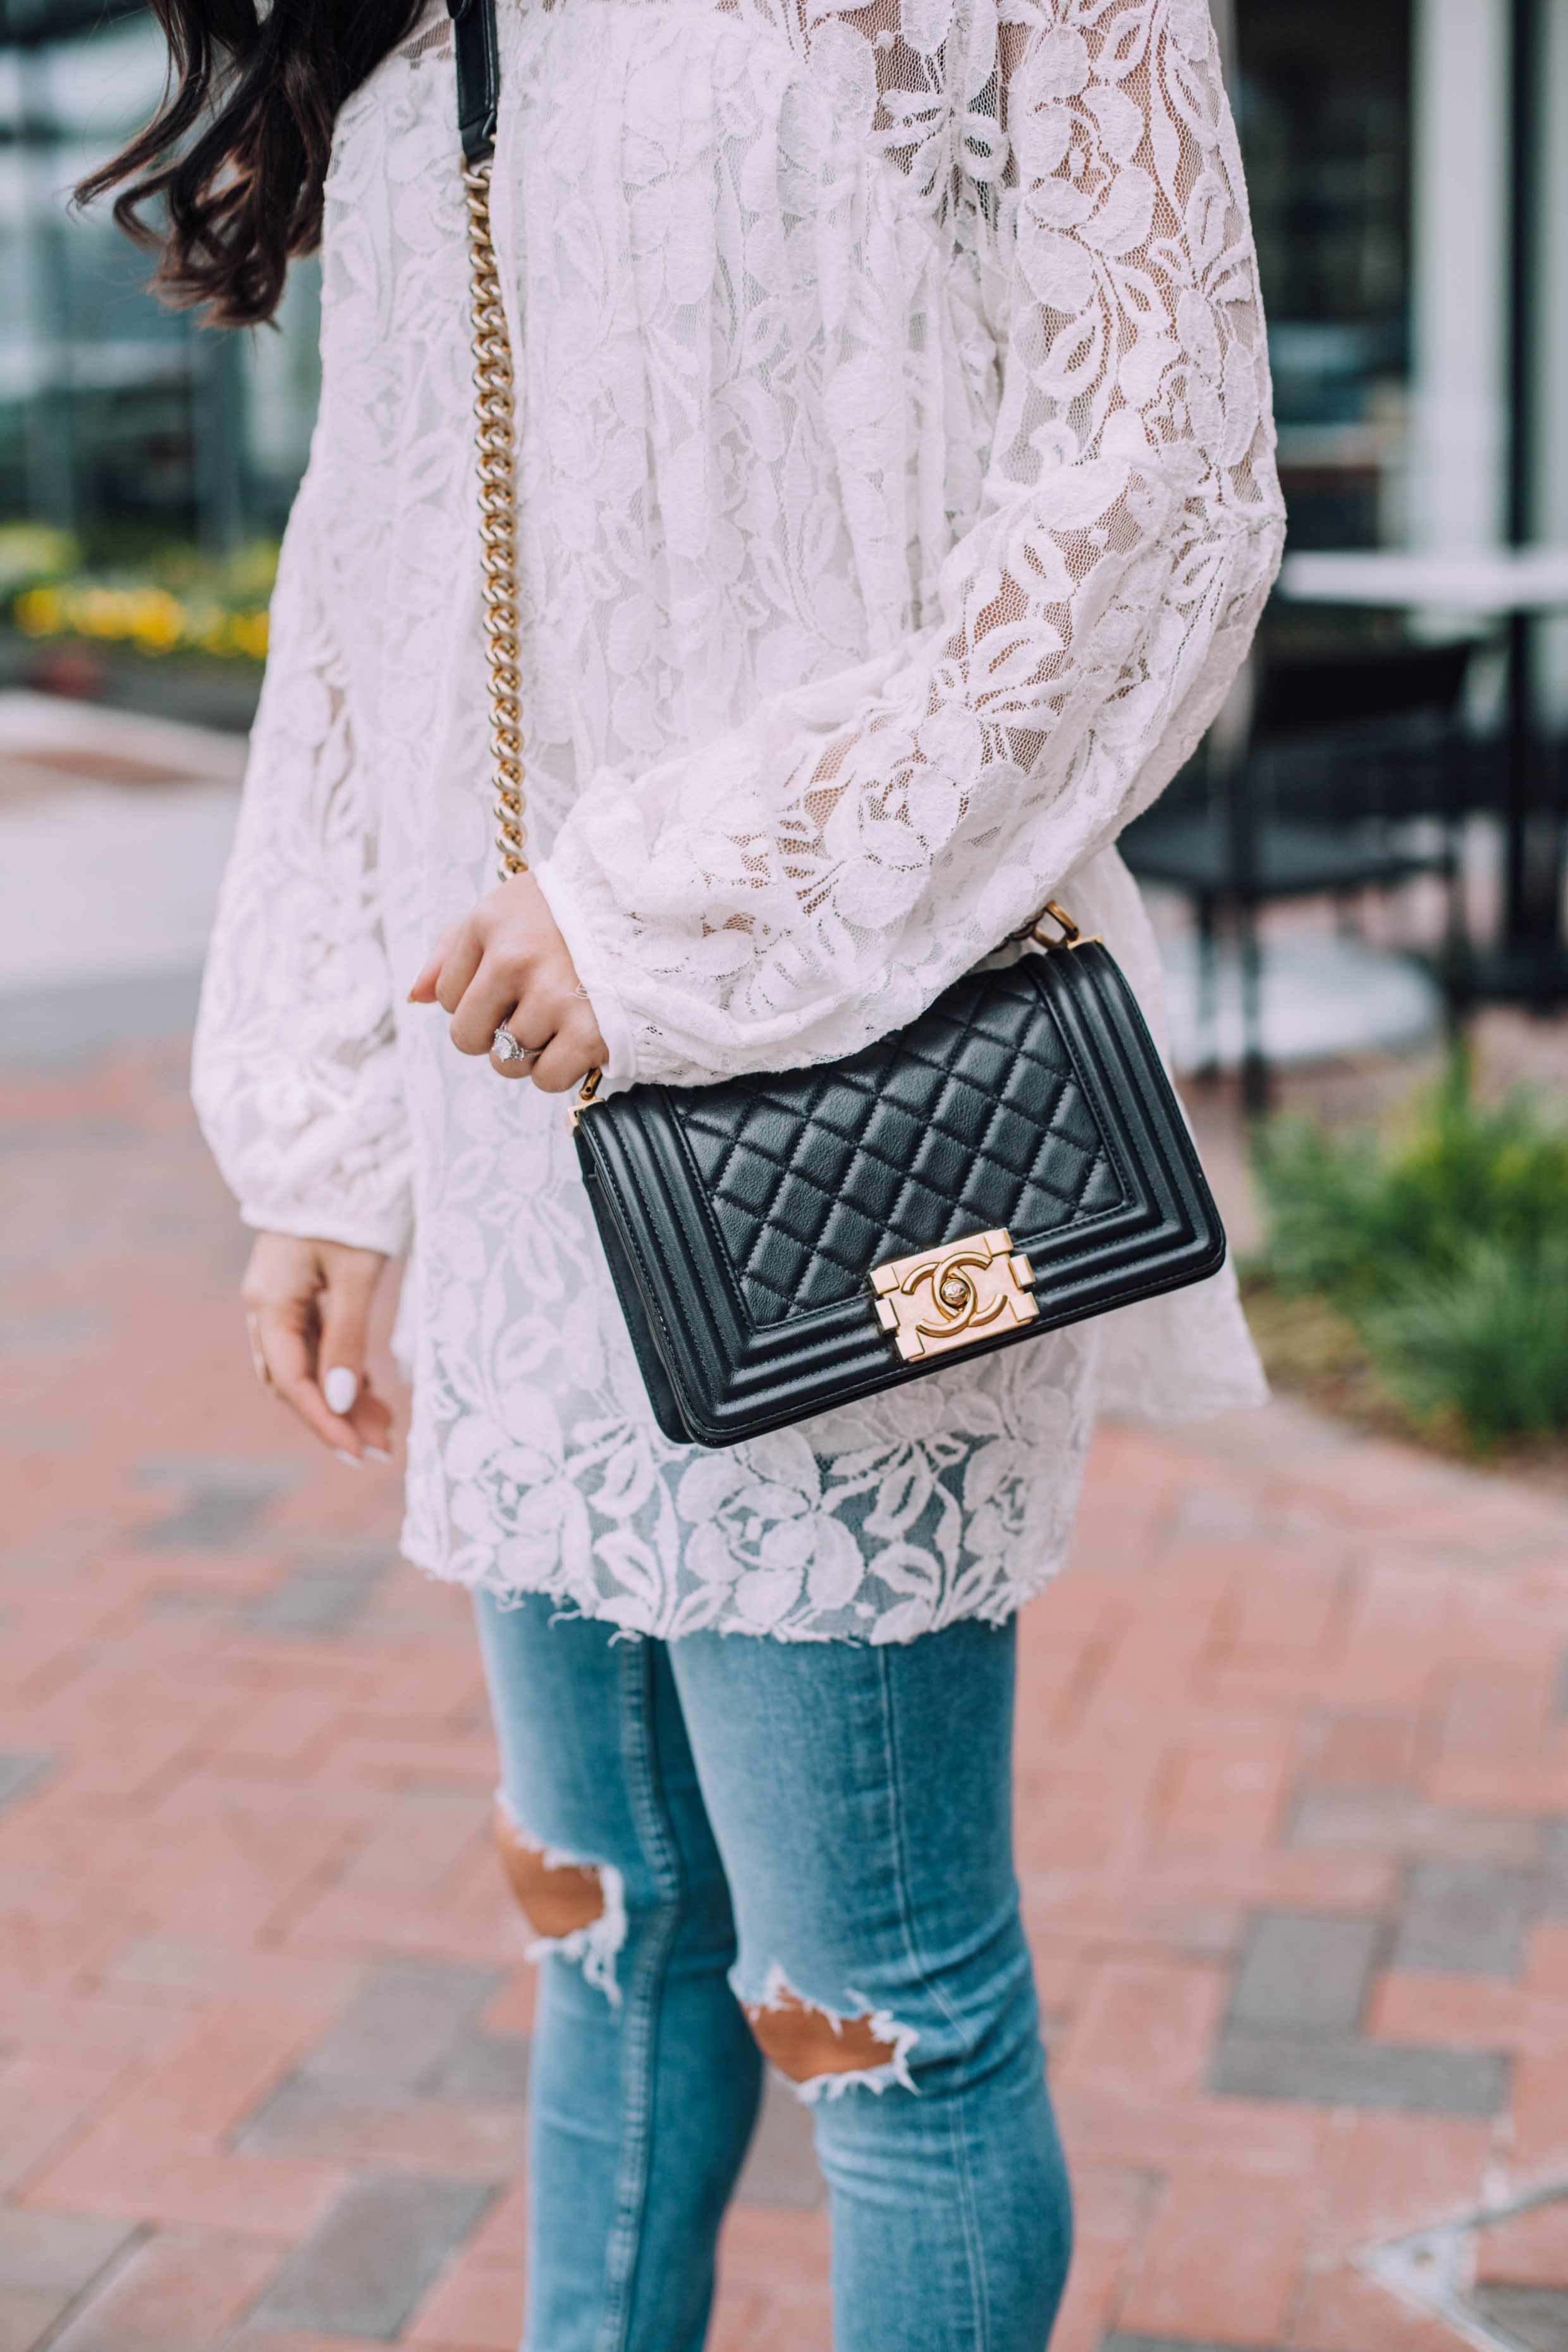 COLOR & CHIC | White Lace Tunic, Light Blue Distressed Jeans and Small Chanel Boy Bag